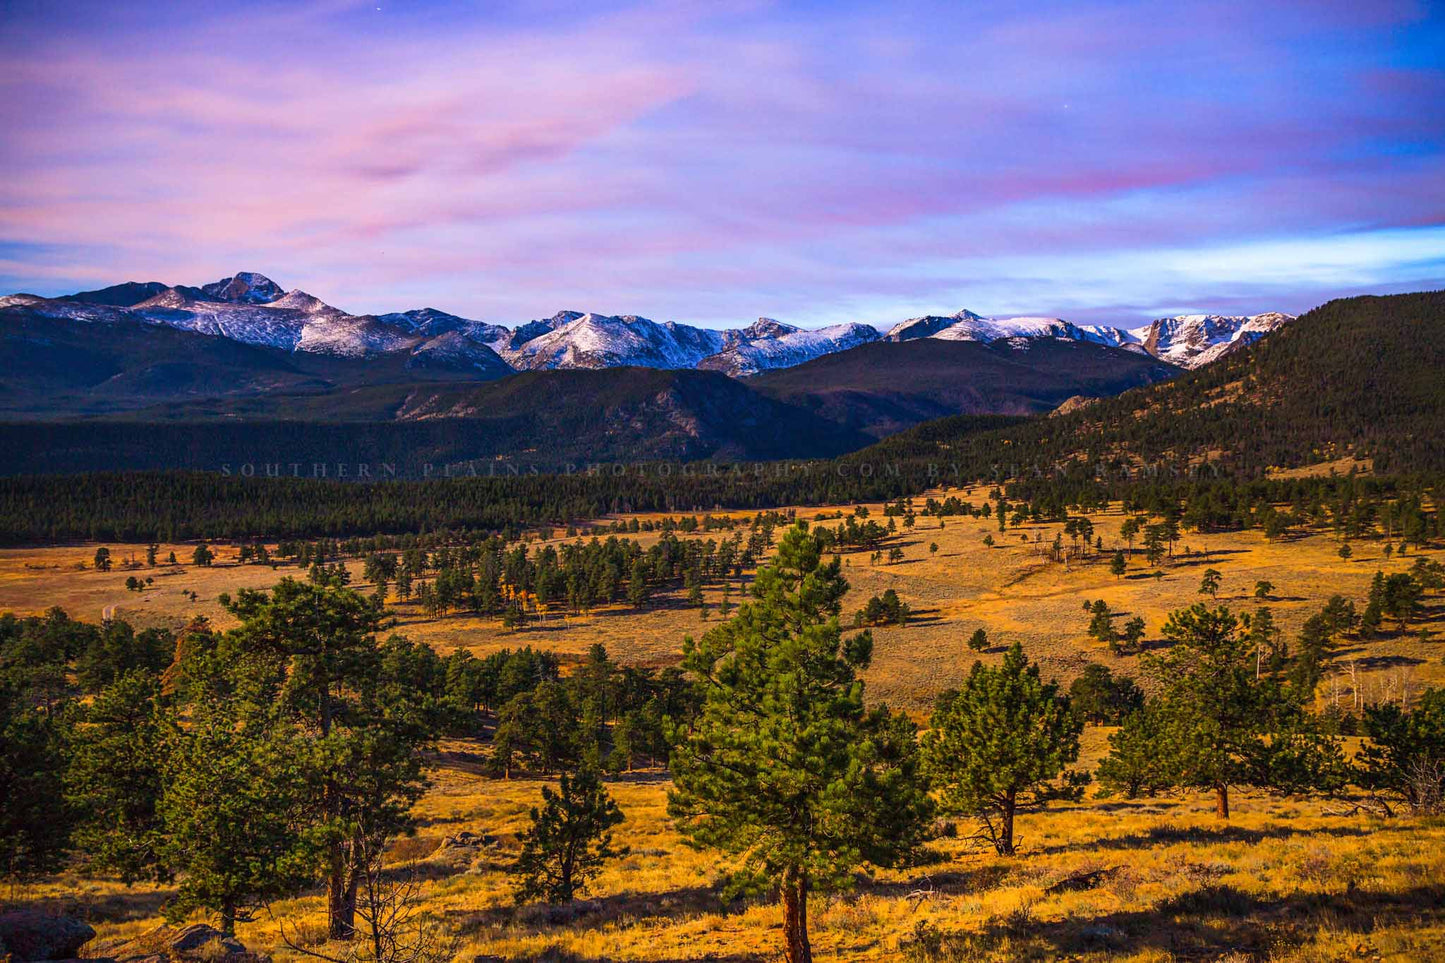 Western landscape photography print of snow-capped peaks overlooking a valley at dusk in Rocky Mountain National Park near Estes Park, Colorado by Sean Ramsey of Southern Plains Photography.